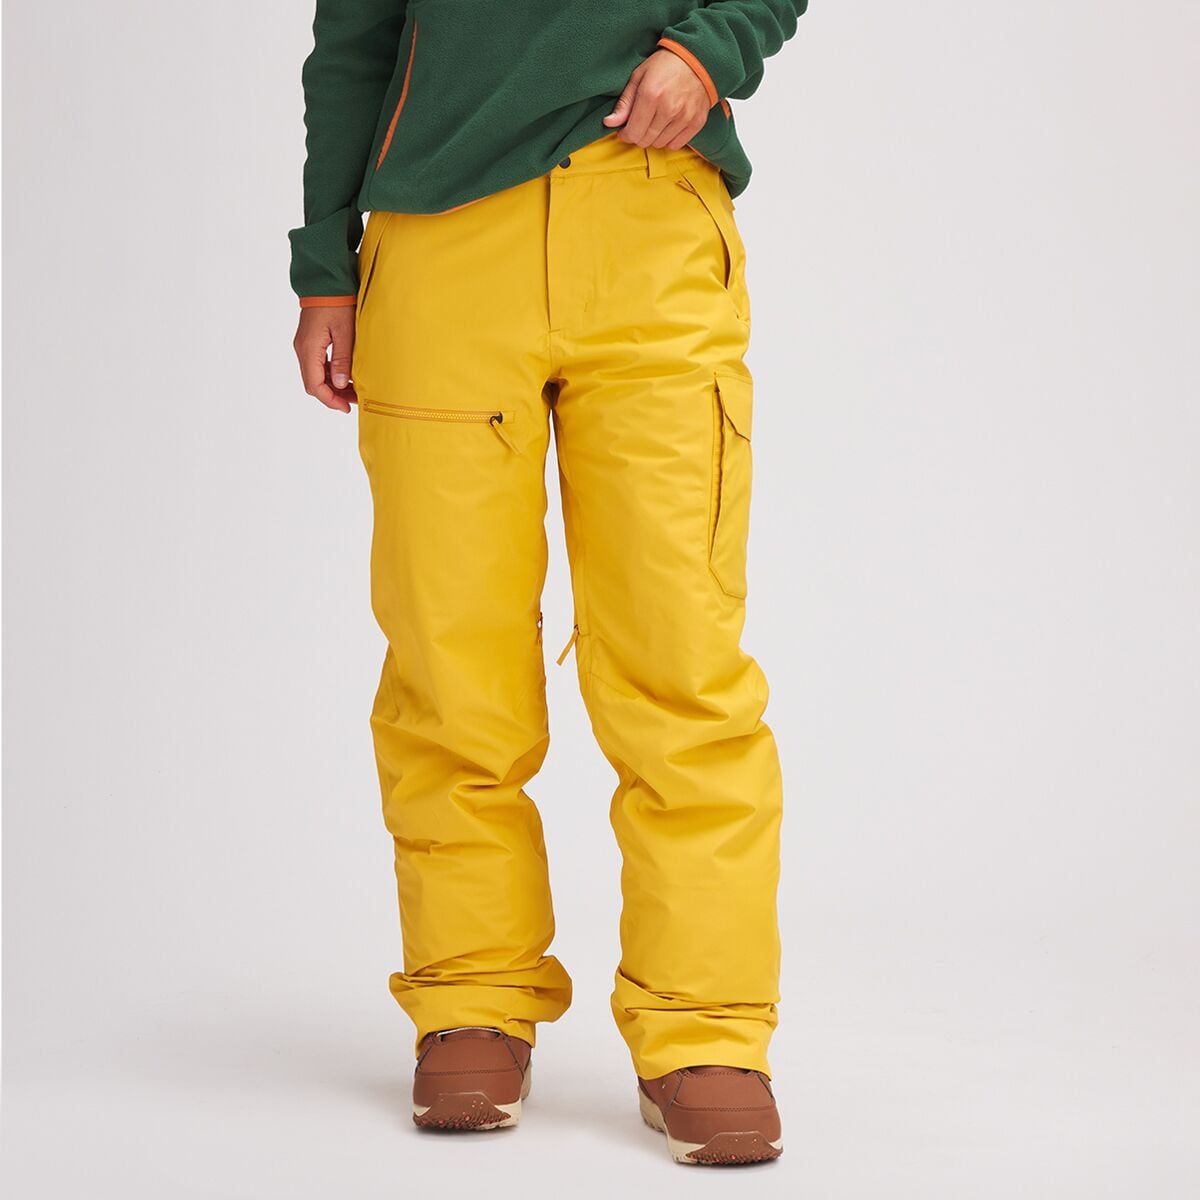 Stoic Insulated Snow Pant - Women's